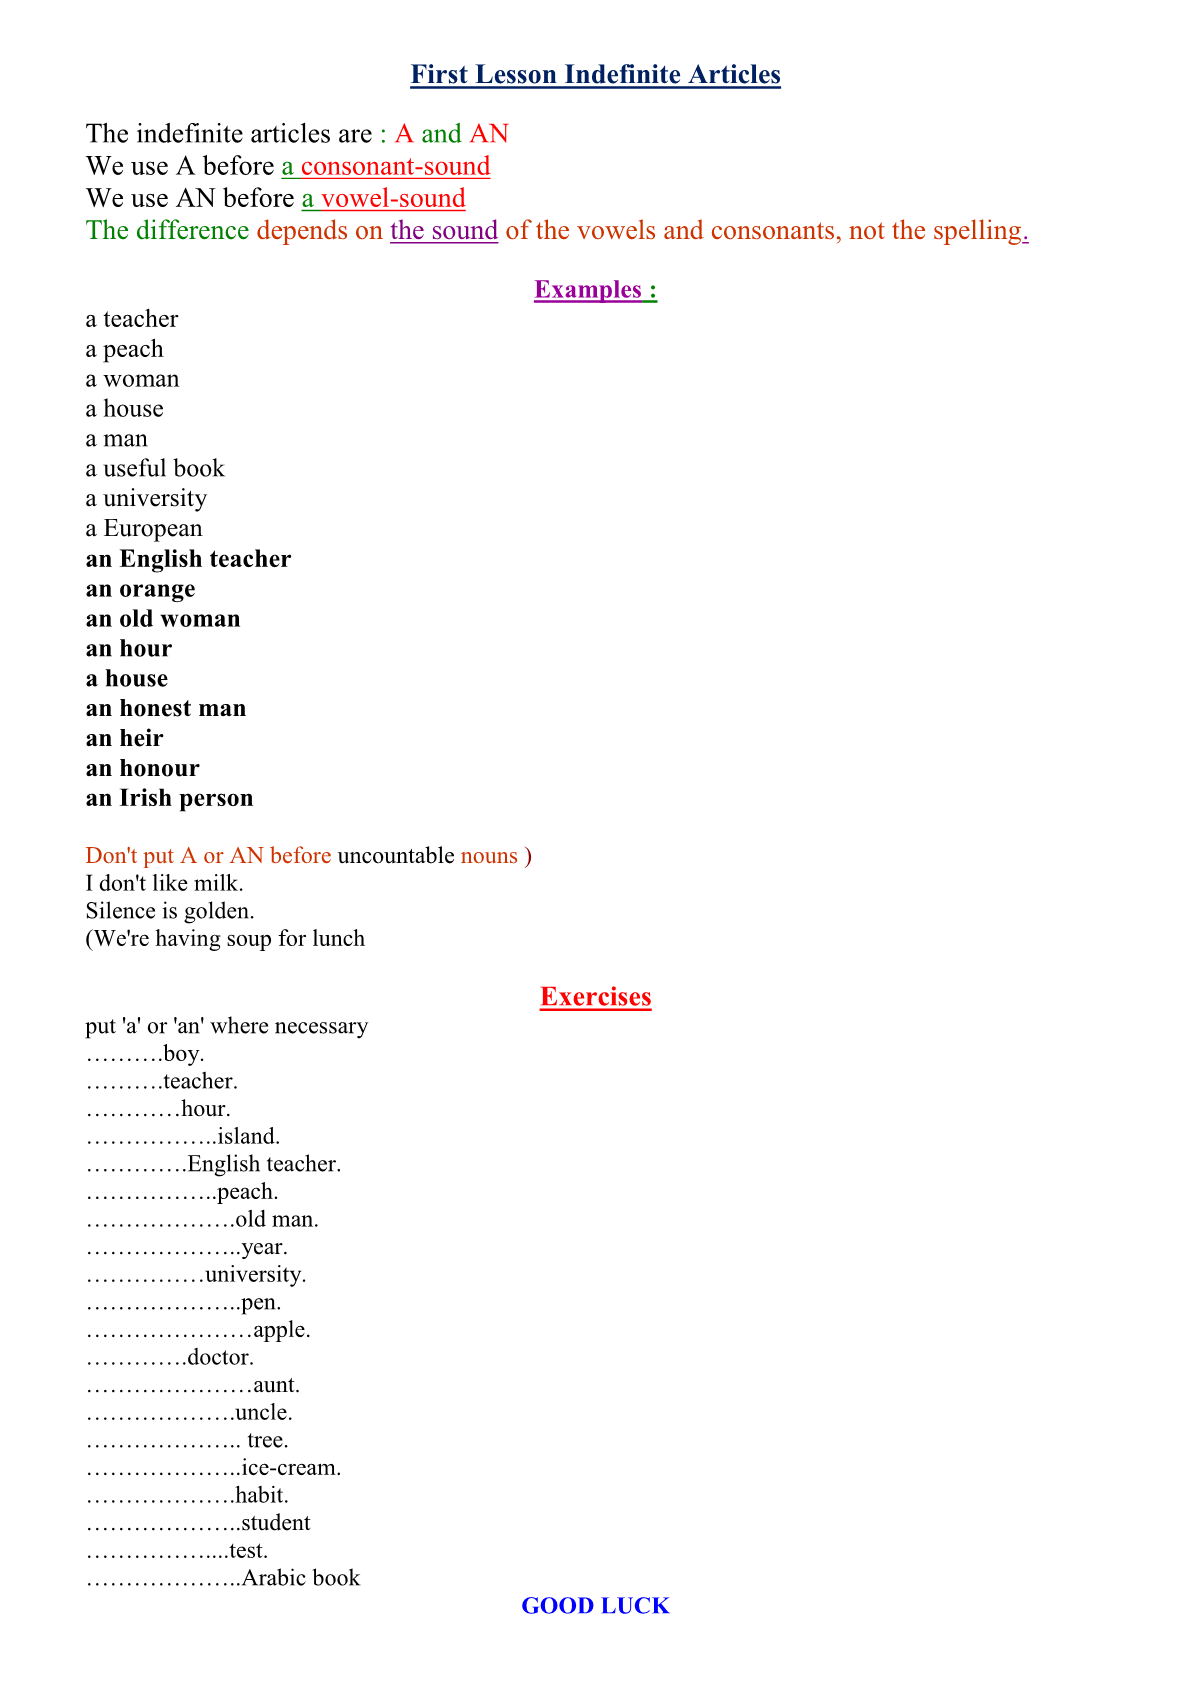 First Lesson Indefinite Articles